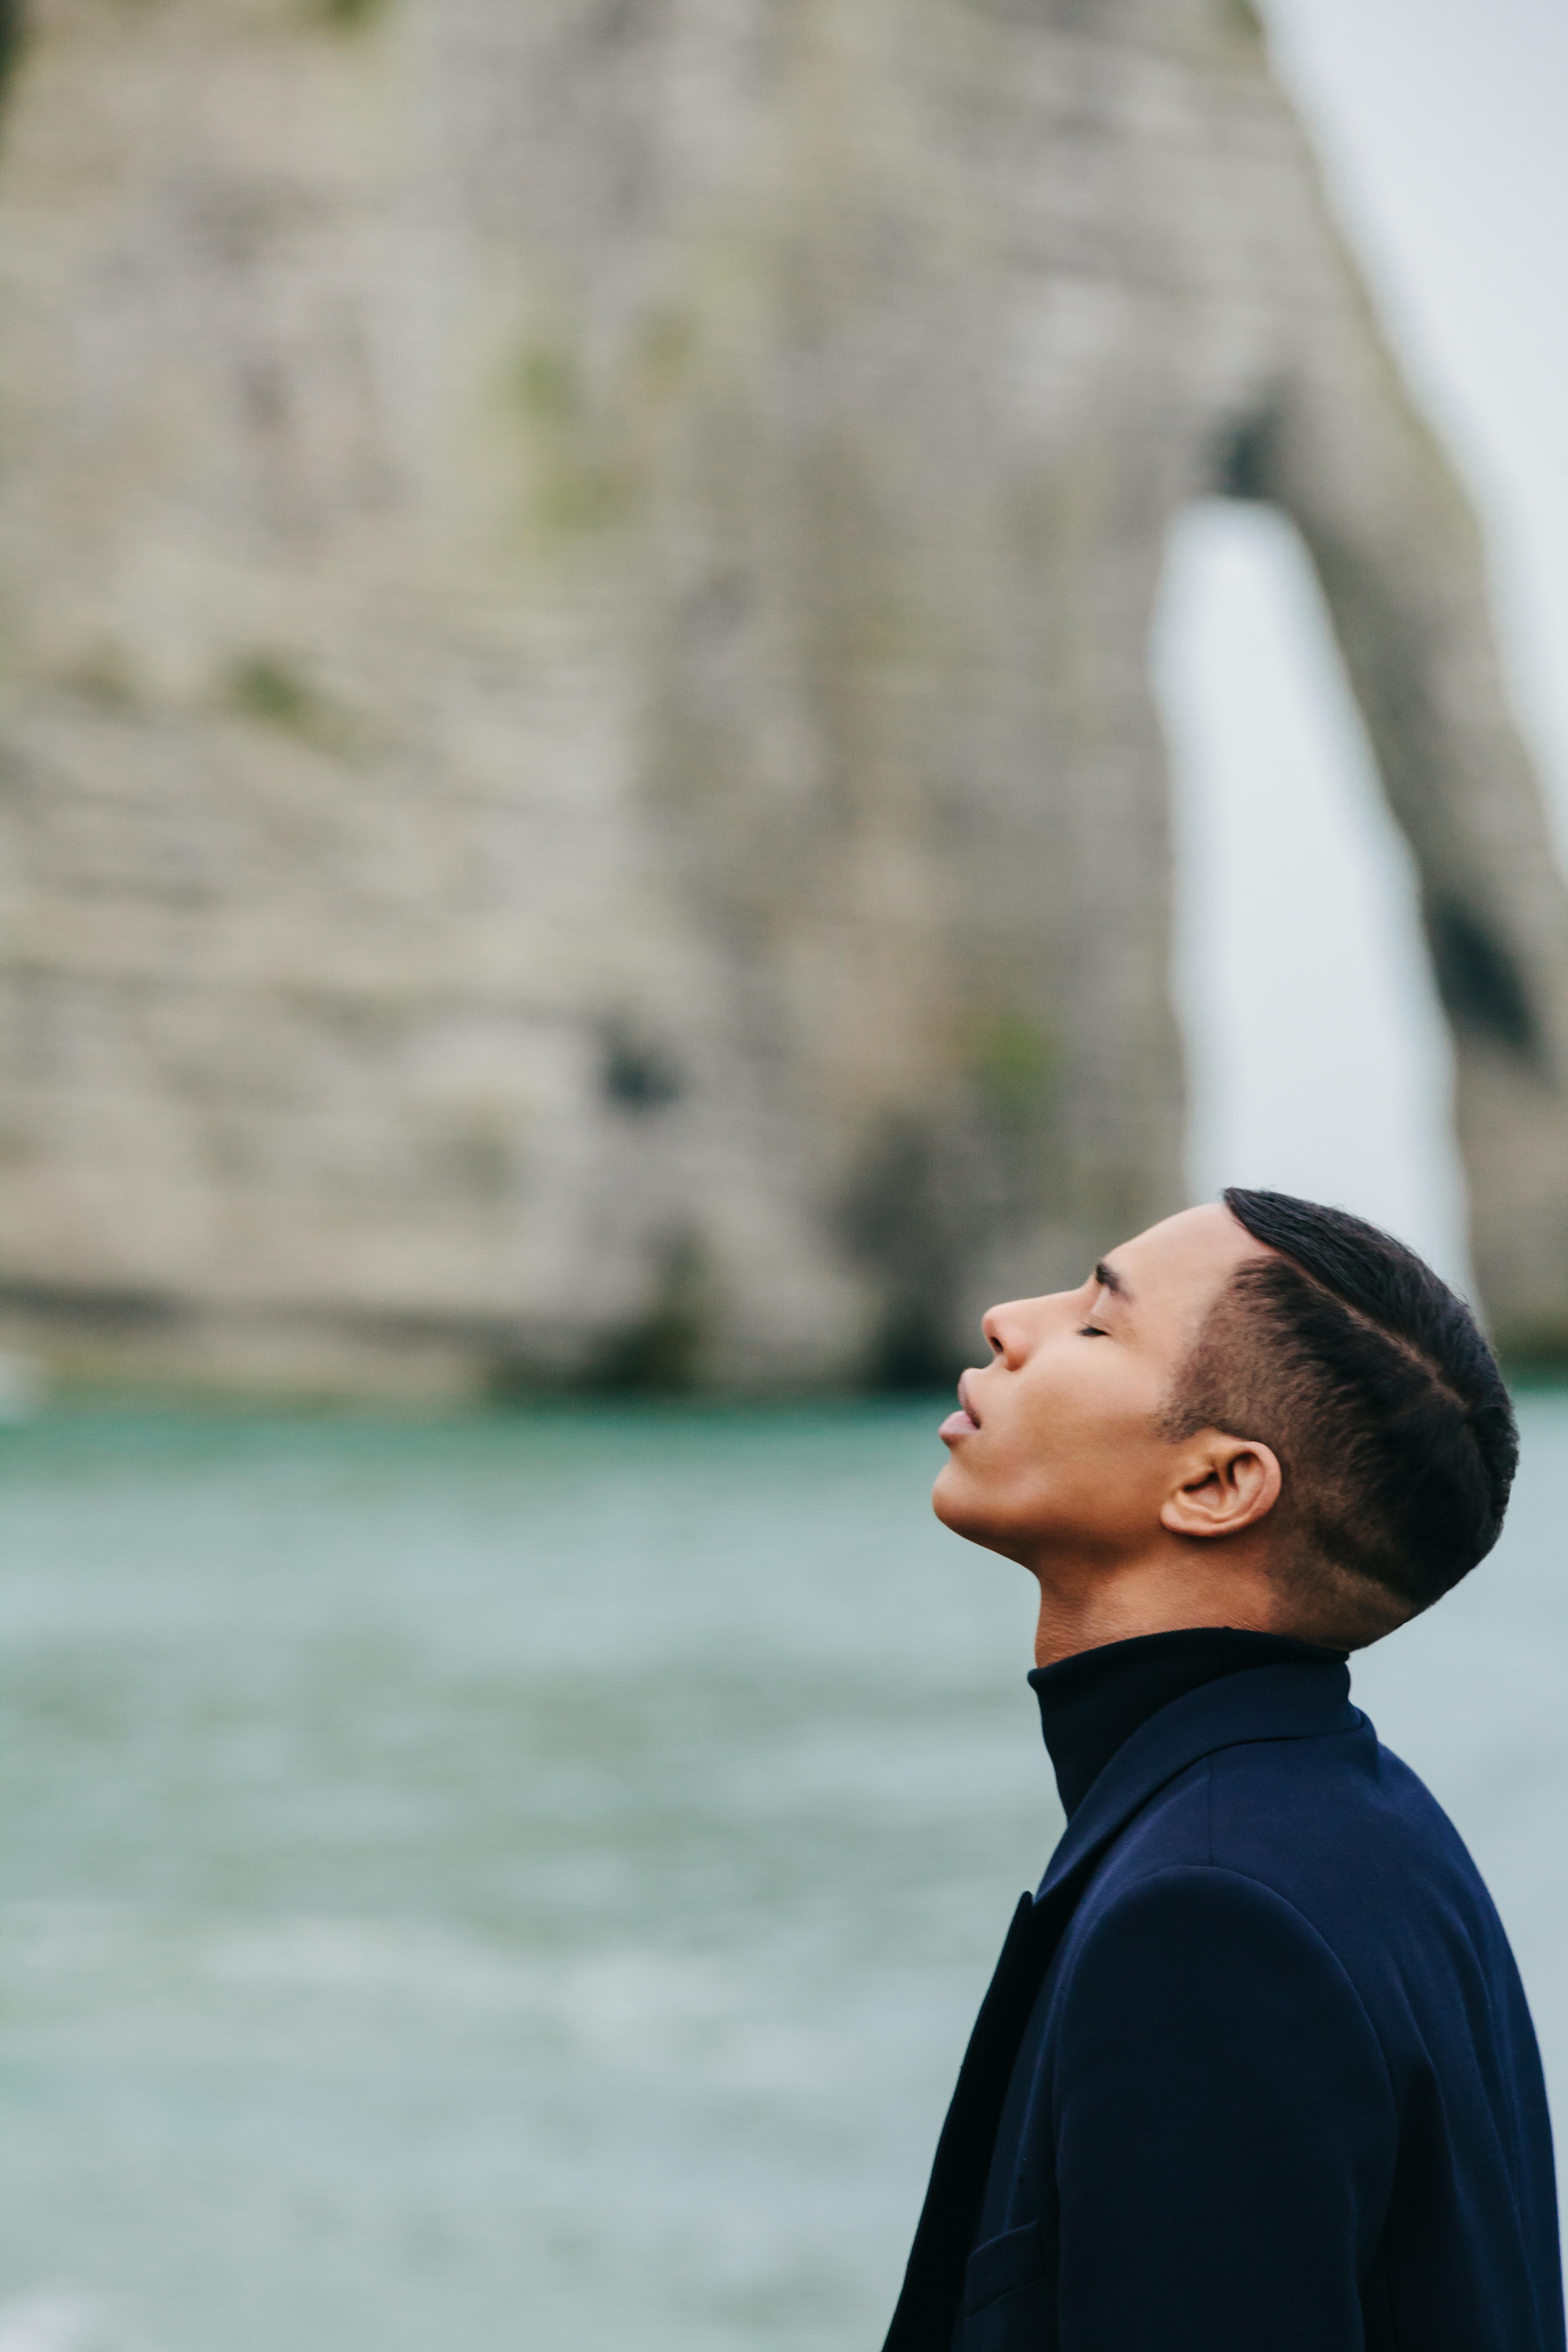 Olivier Rousteing standing on a beach, cliffs in the background